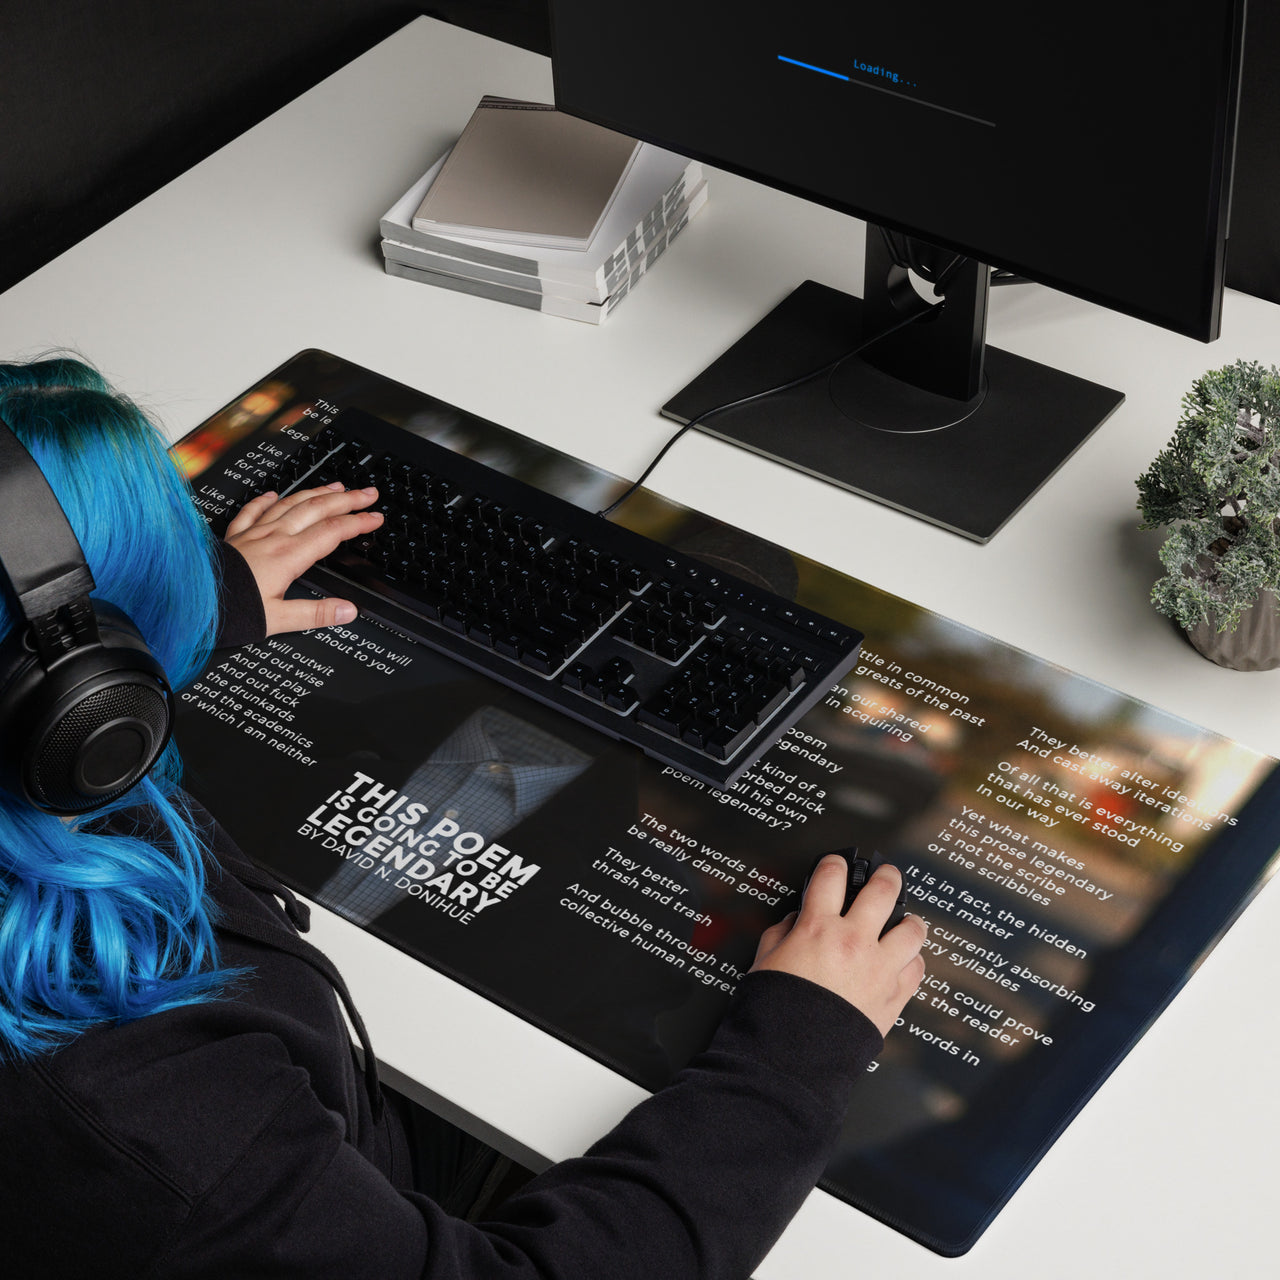 EXTRA LARGE MOUSE PAD - "THIS POEM IS GOING TO BE LEGENDARY" GAMING MOUSE PAD